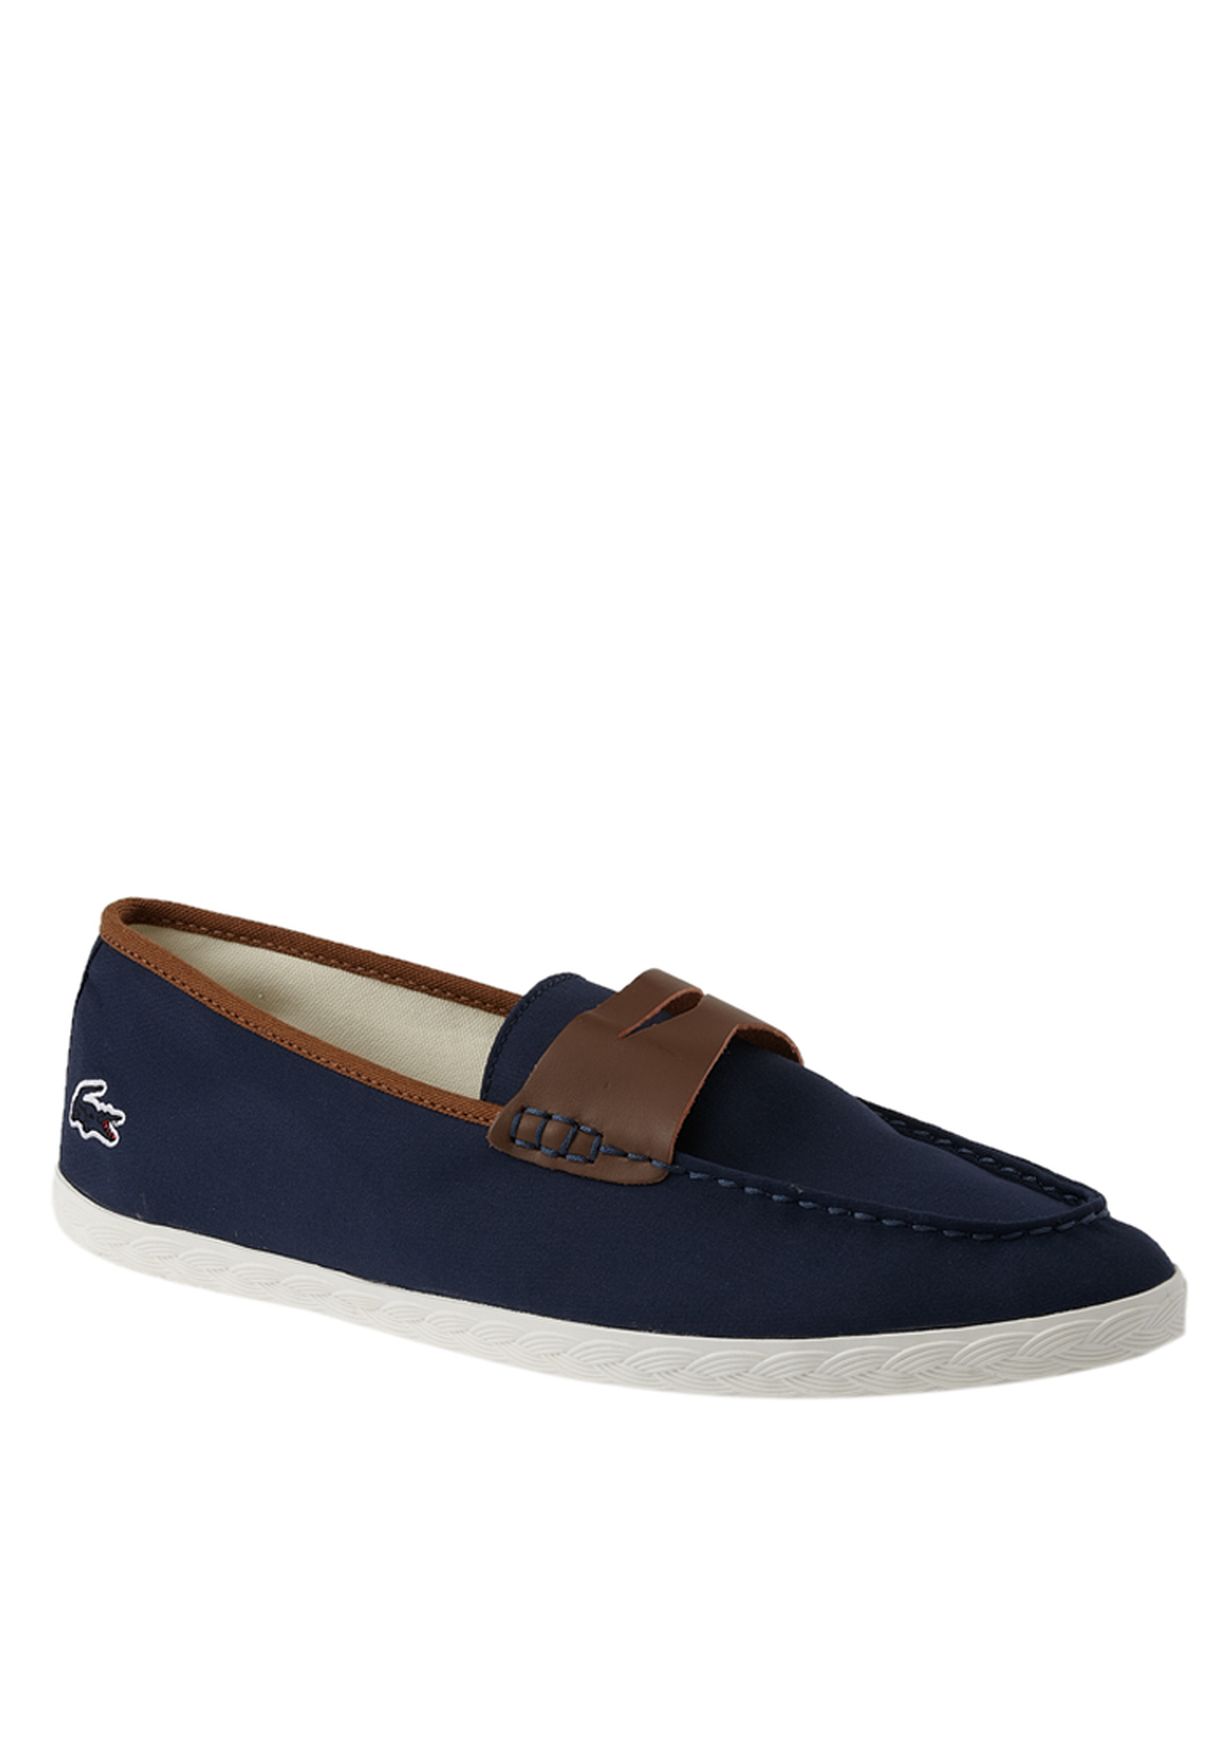 Buy Lacoste navy Loafers & Moccasins for Men in Dubai, Abu Dhabi